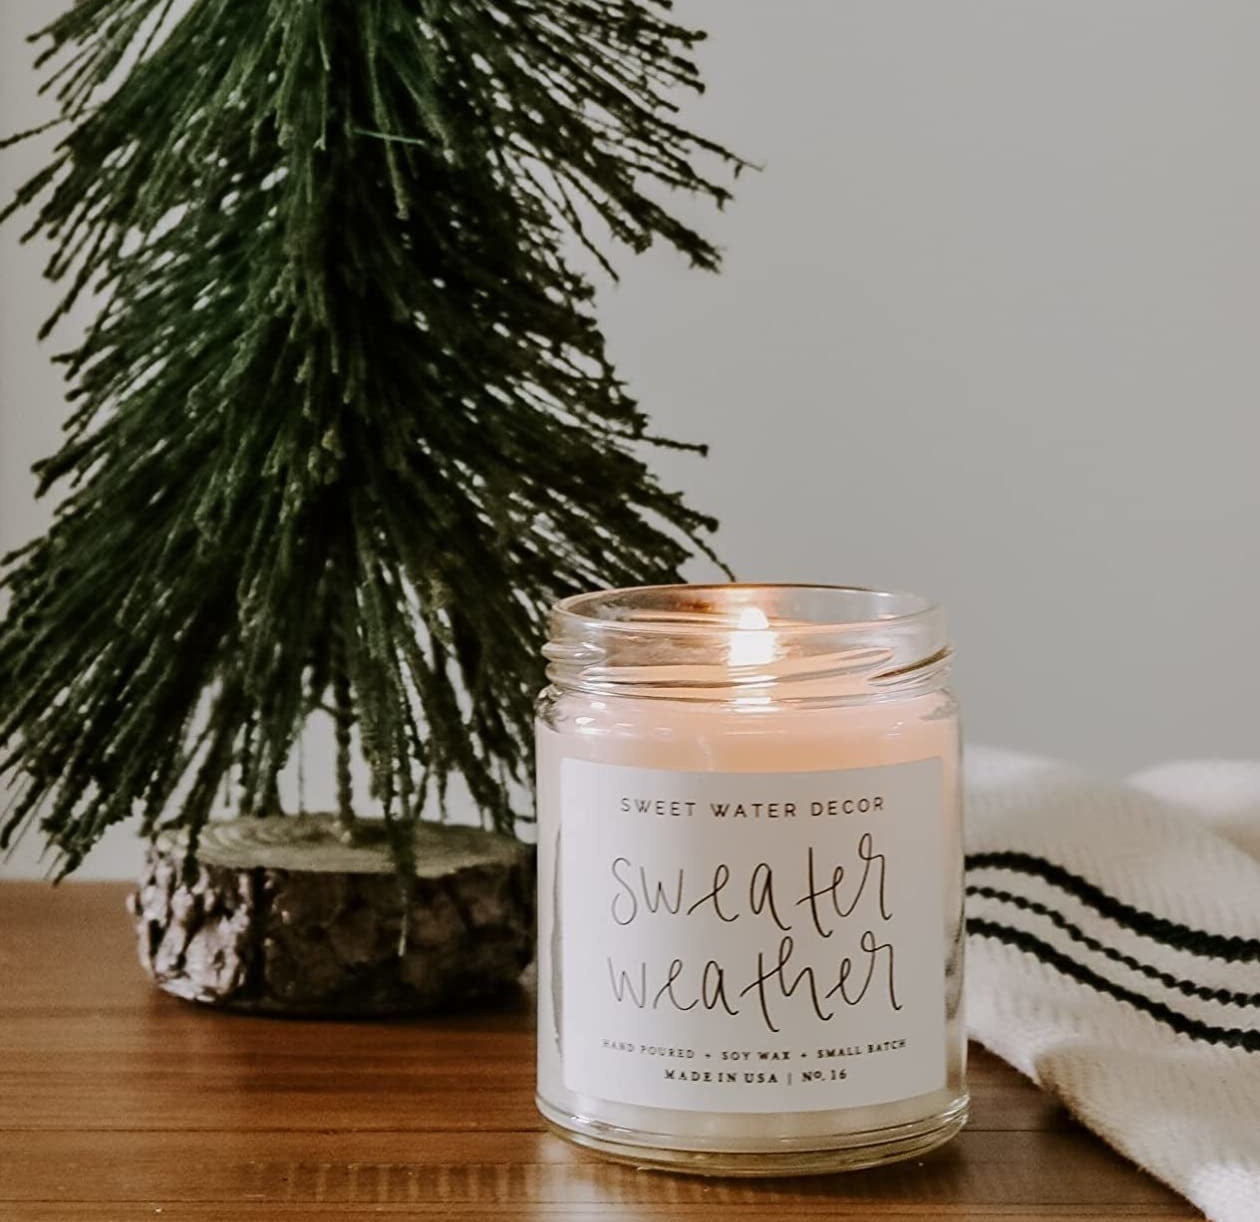 The lit sweater weather candle next to a small decorative tree